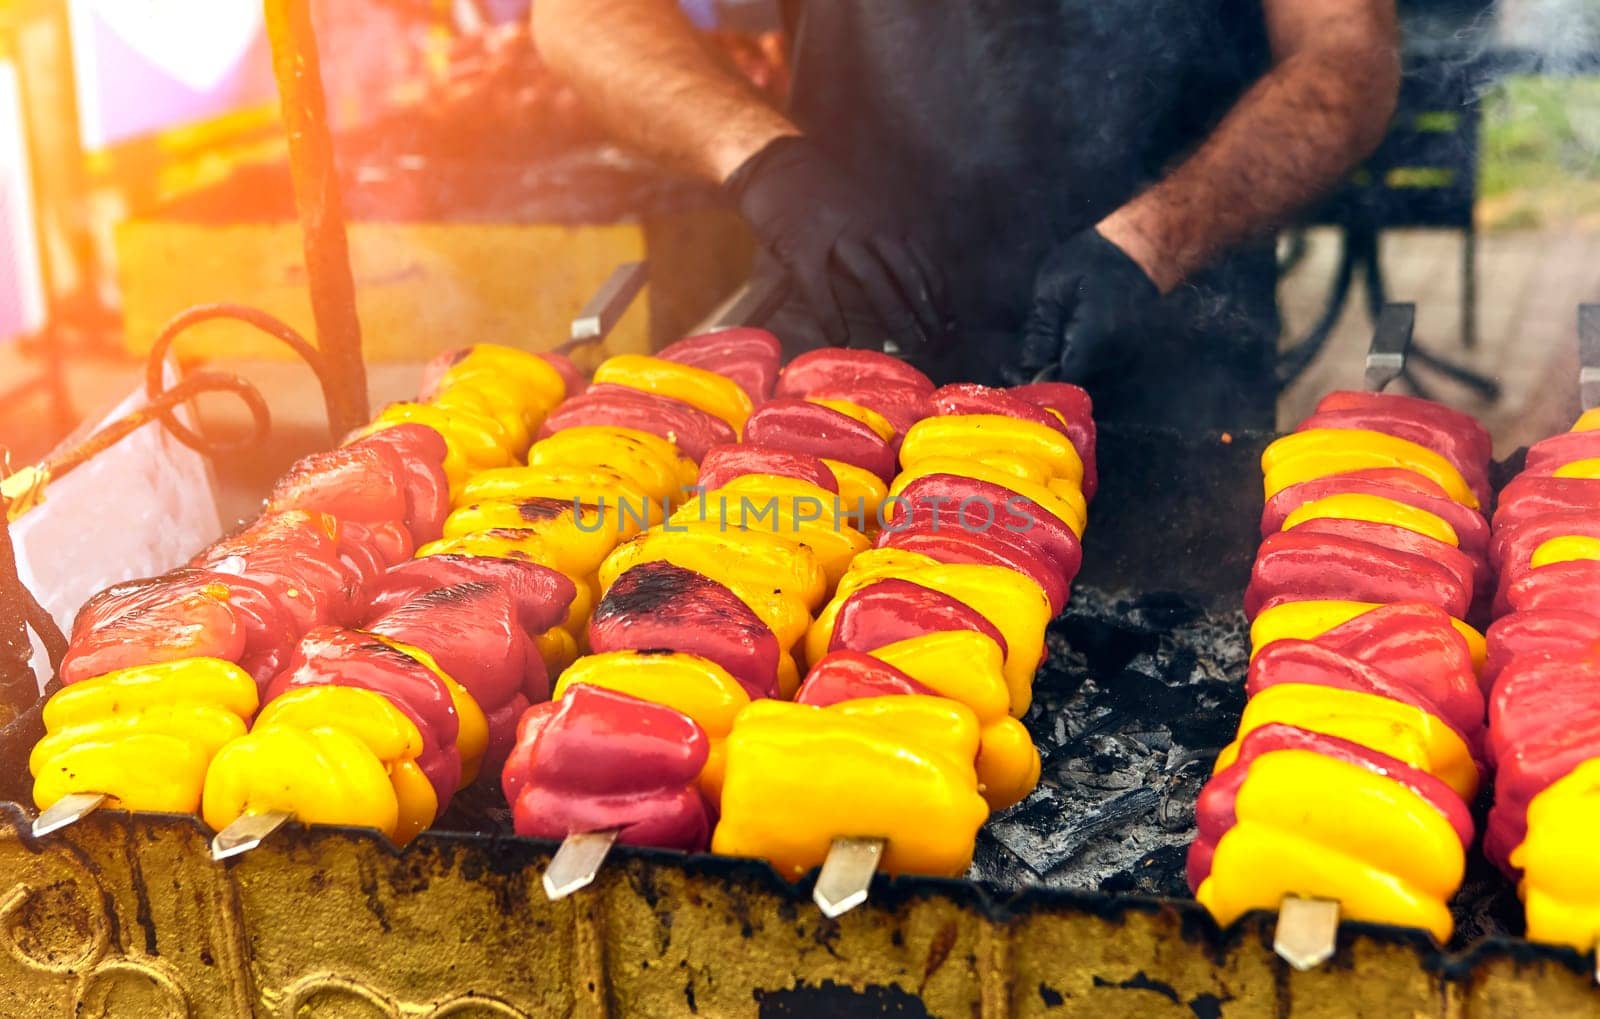 Rows of red, yellow, and orange bell peppers on skewers being grilled outdoors at a food market. by Hil